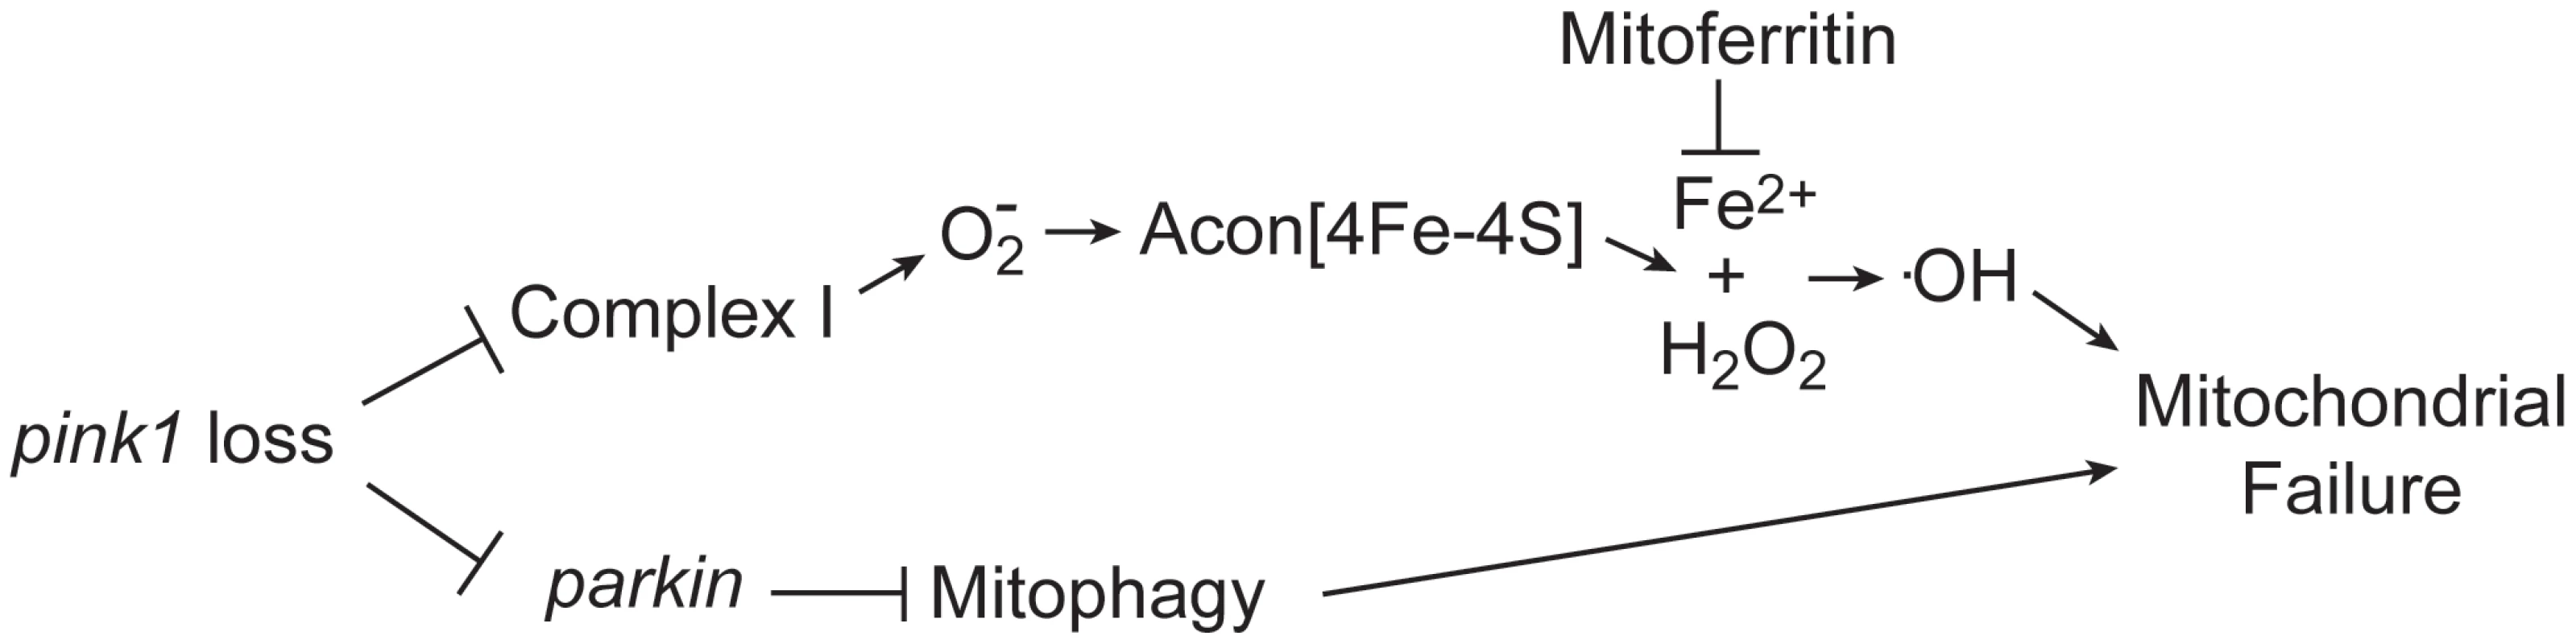 Model of oxidative Acon inactivation in <i>pink1</i> mutants.